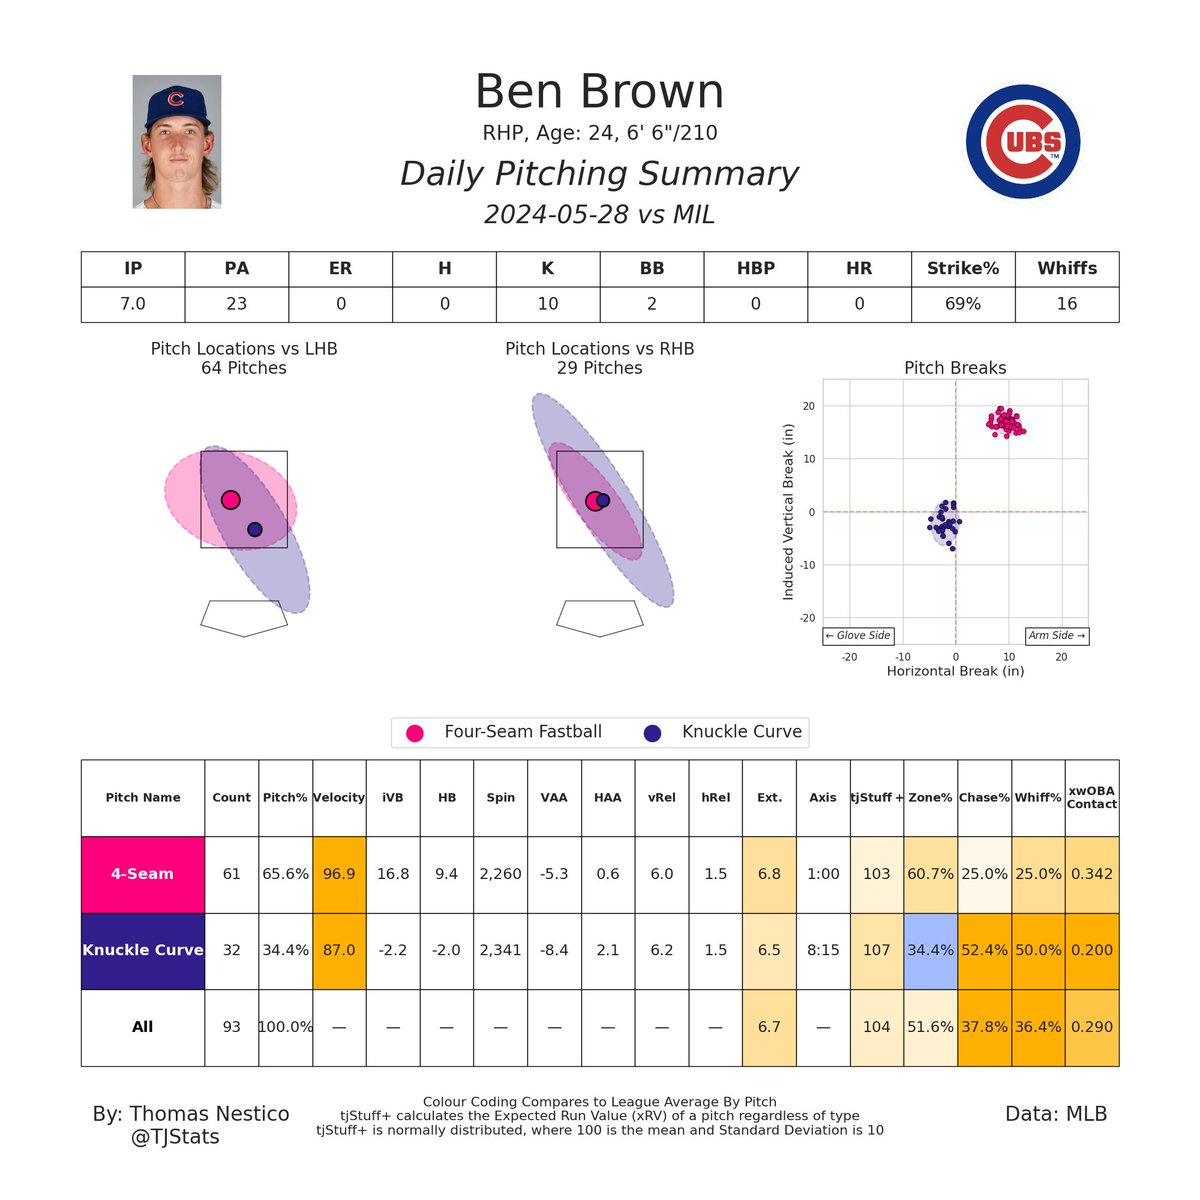 Ben Brown was stupendous today, firing off 7.0 No-Hit IP with 10 K

Brown utilized his 2-pitch mix to near perfection, filling the zone with fastballs and generating whiffs & chases with his curveball. Both pitches graded out well

The rookie has 2.72 ERA and 2.42 FIP in 46.1 IP